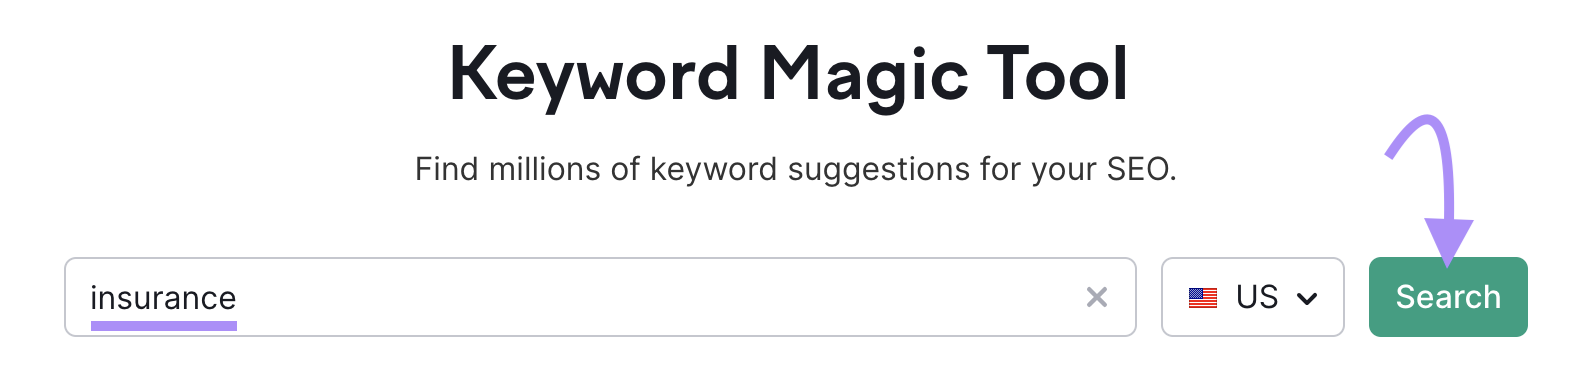 search for "insurance" in the US in Keyword Magic Tool